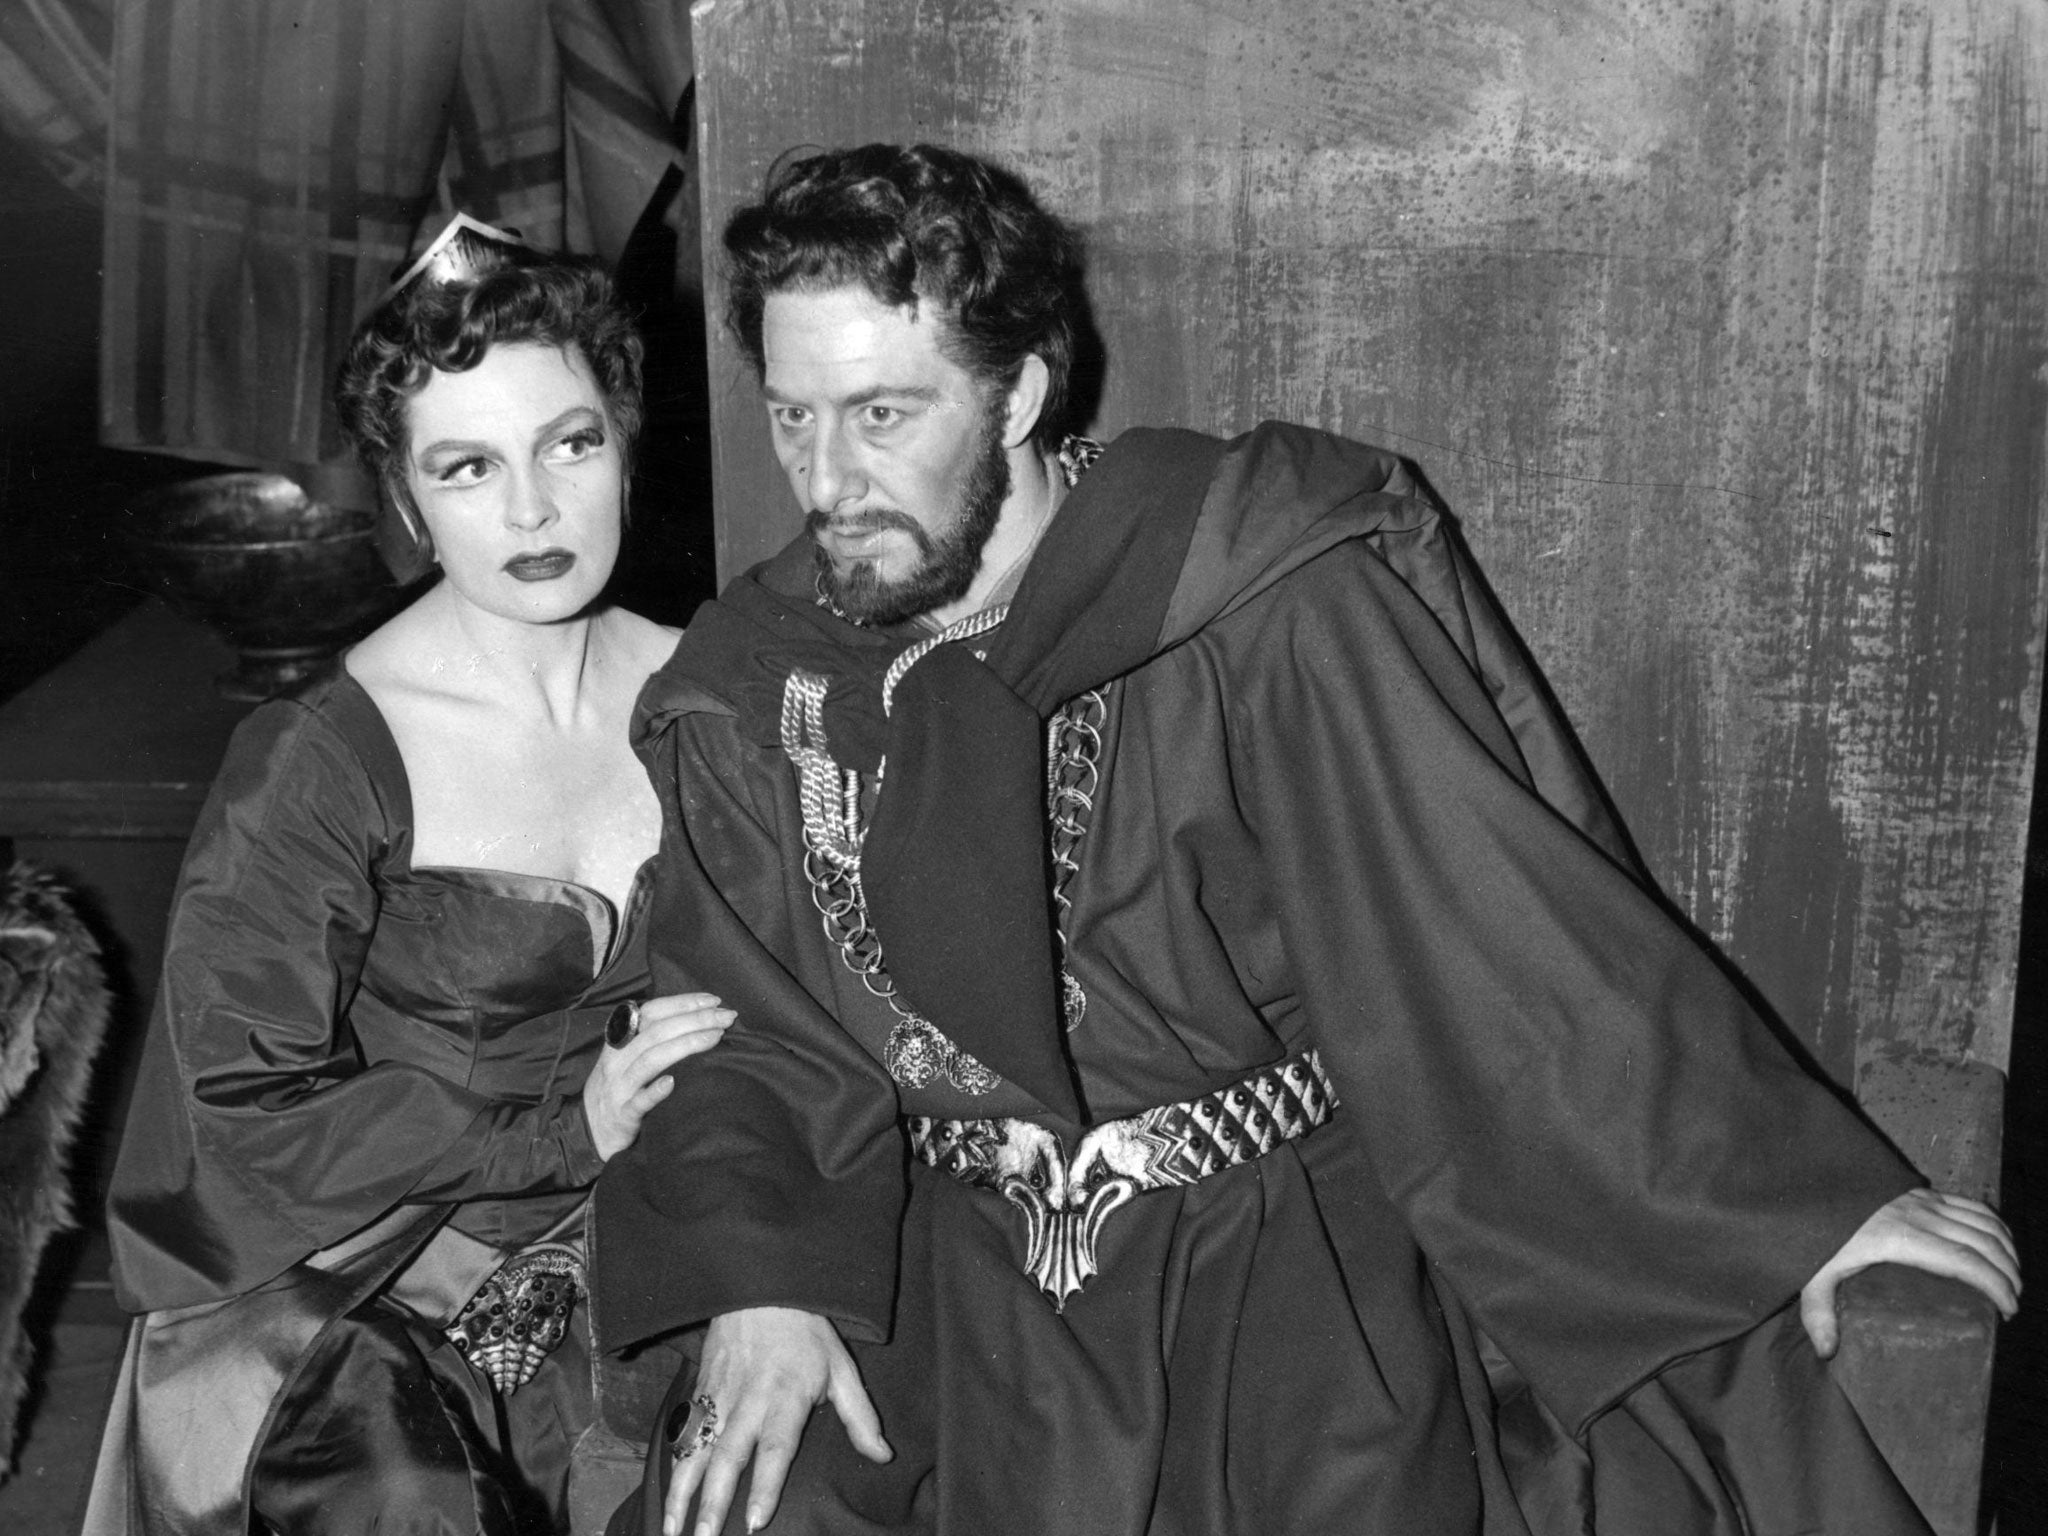 Rogers as Macbeth, with Coral Browne as Lady Macbeth, in the 1956 production at the Old Vic in London